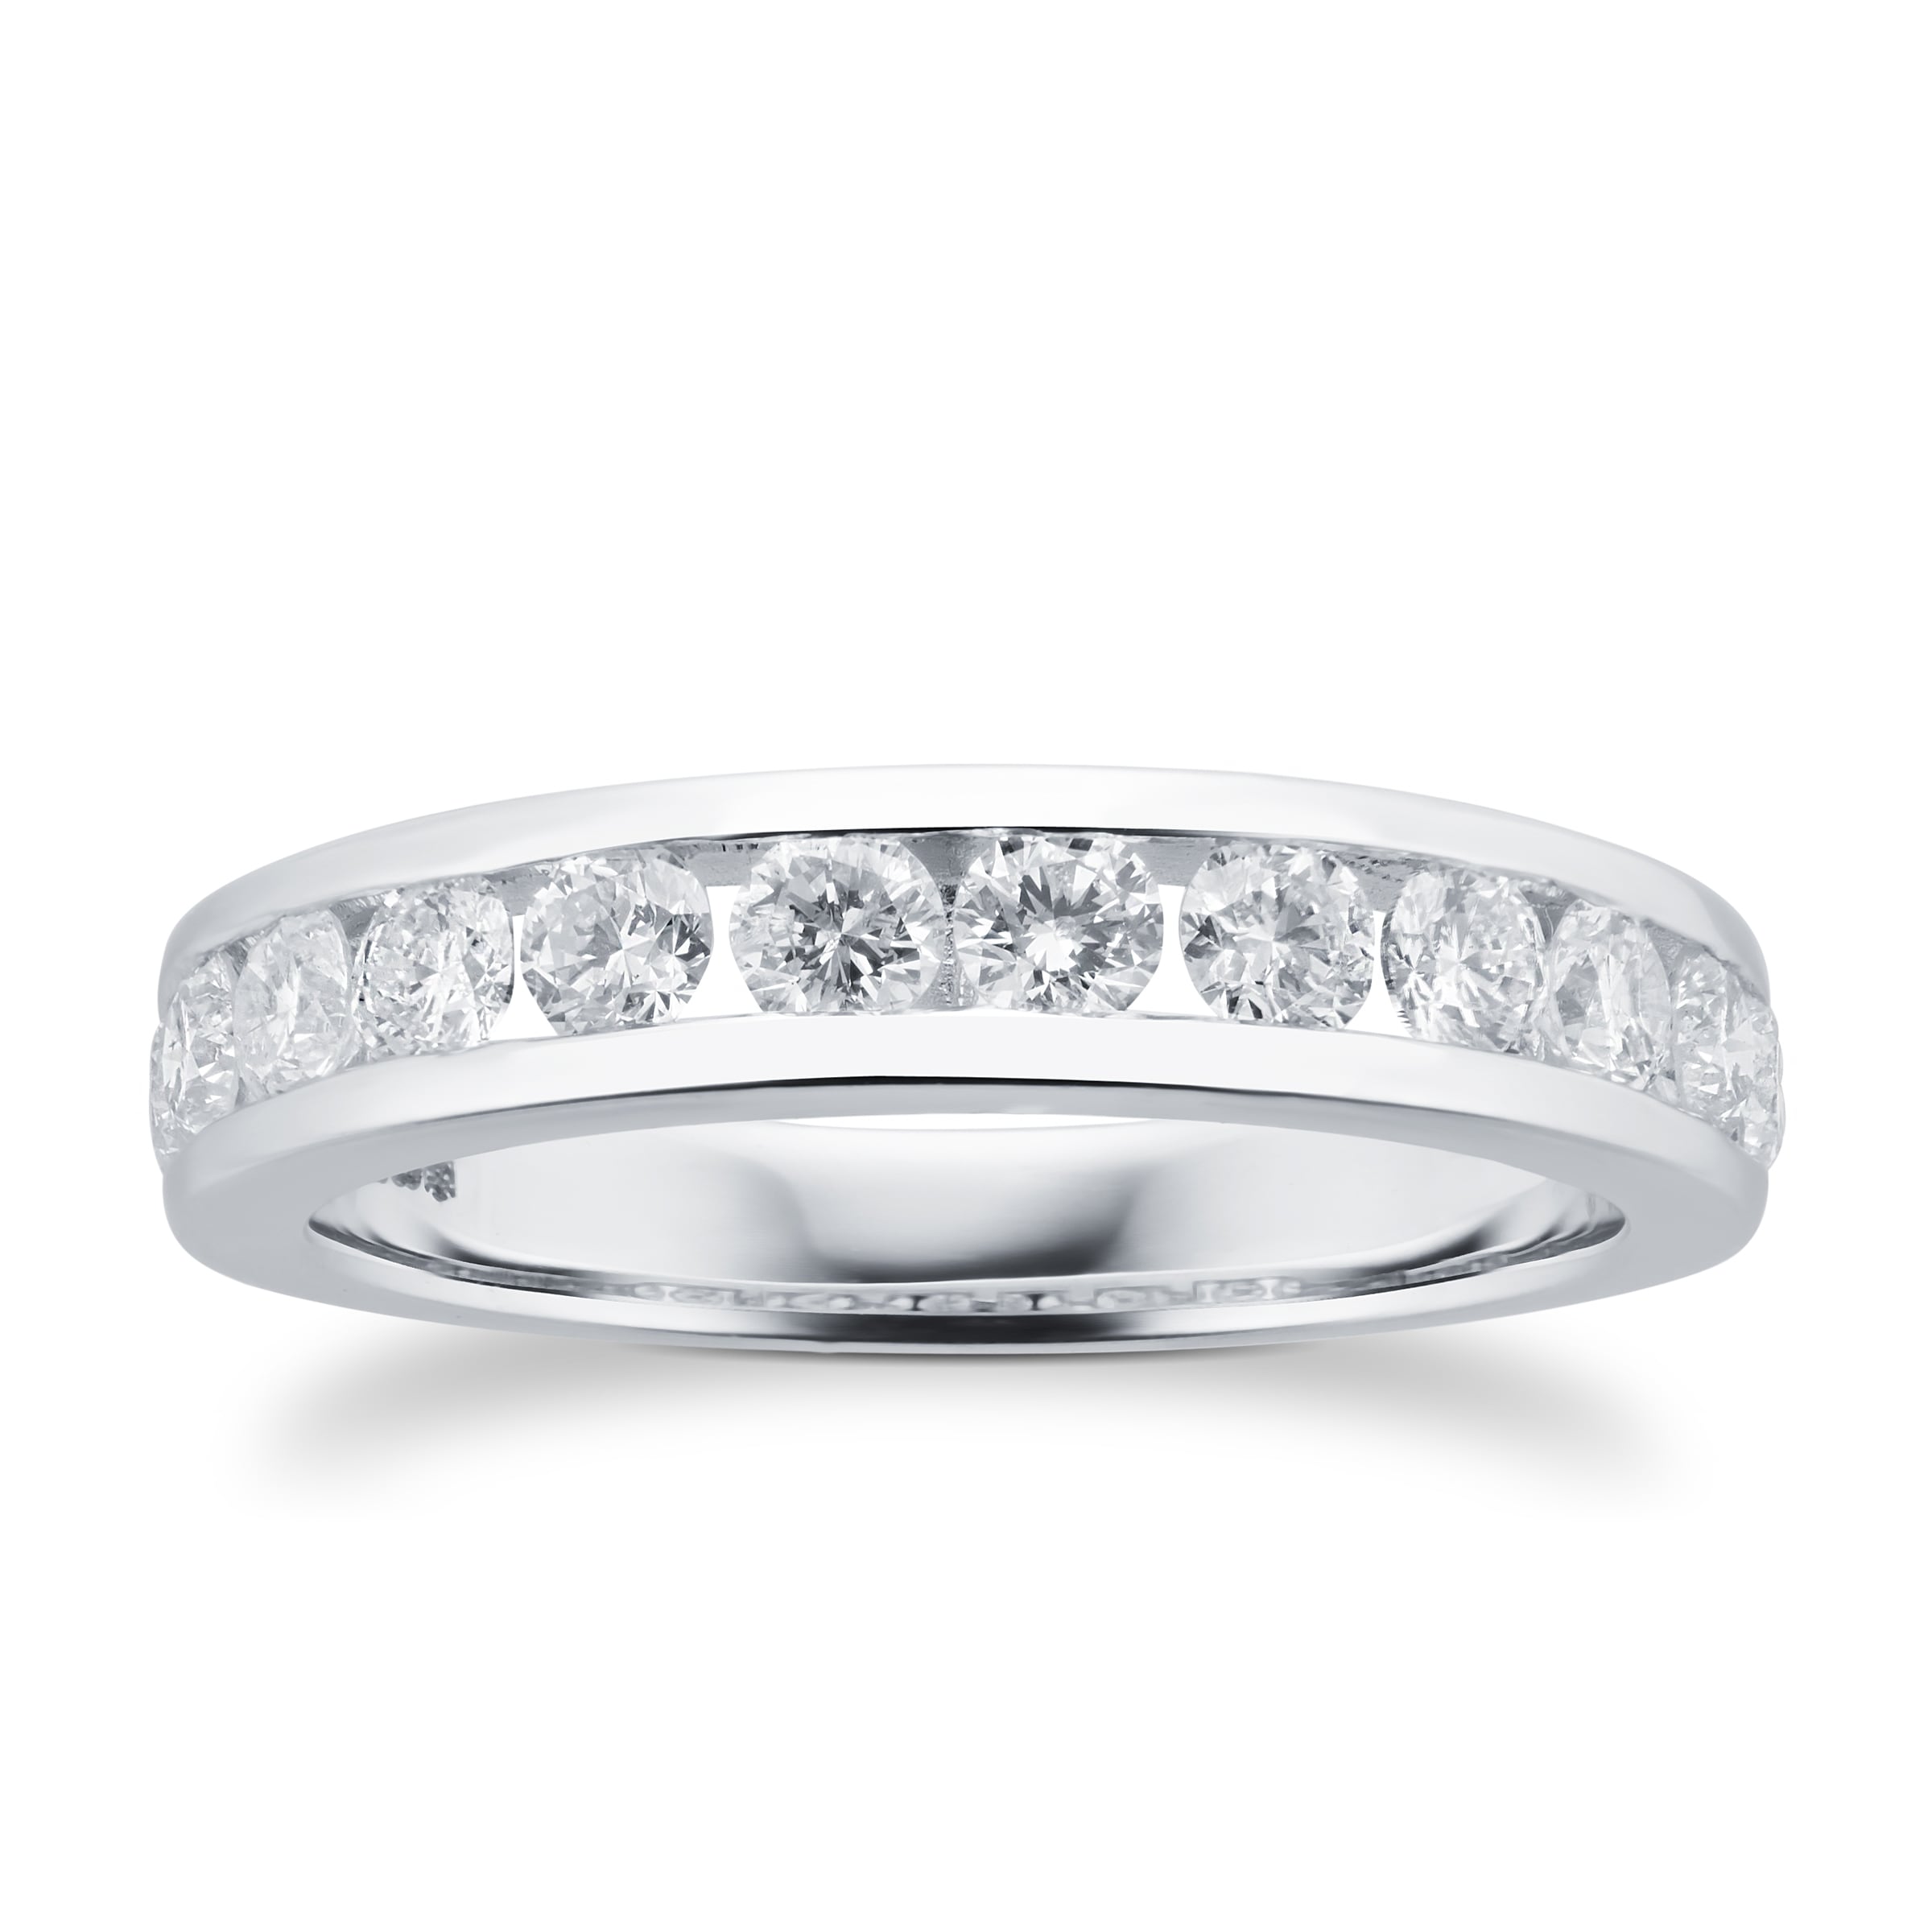 Brilliant Cut 1.00ct Channel Set Half Eternity Ring In 9ct White Gold - Ring Size L